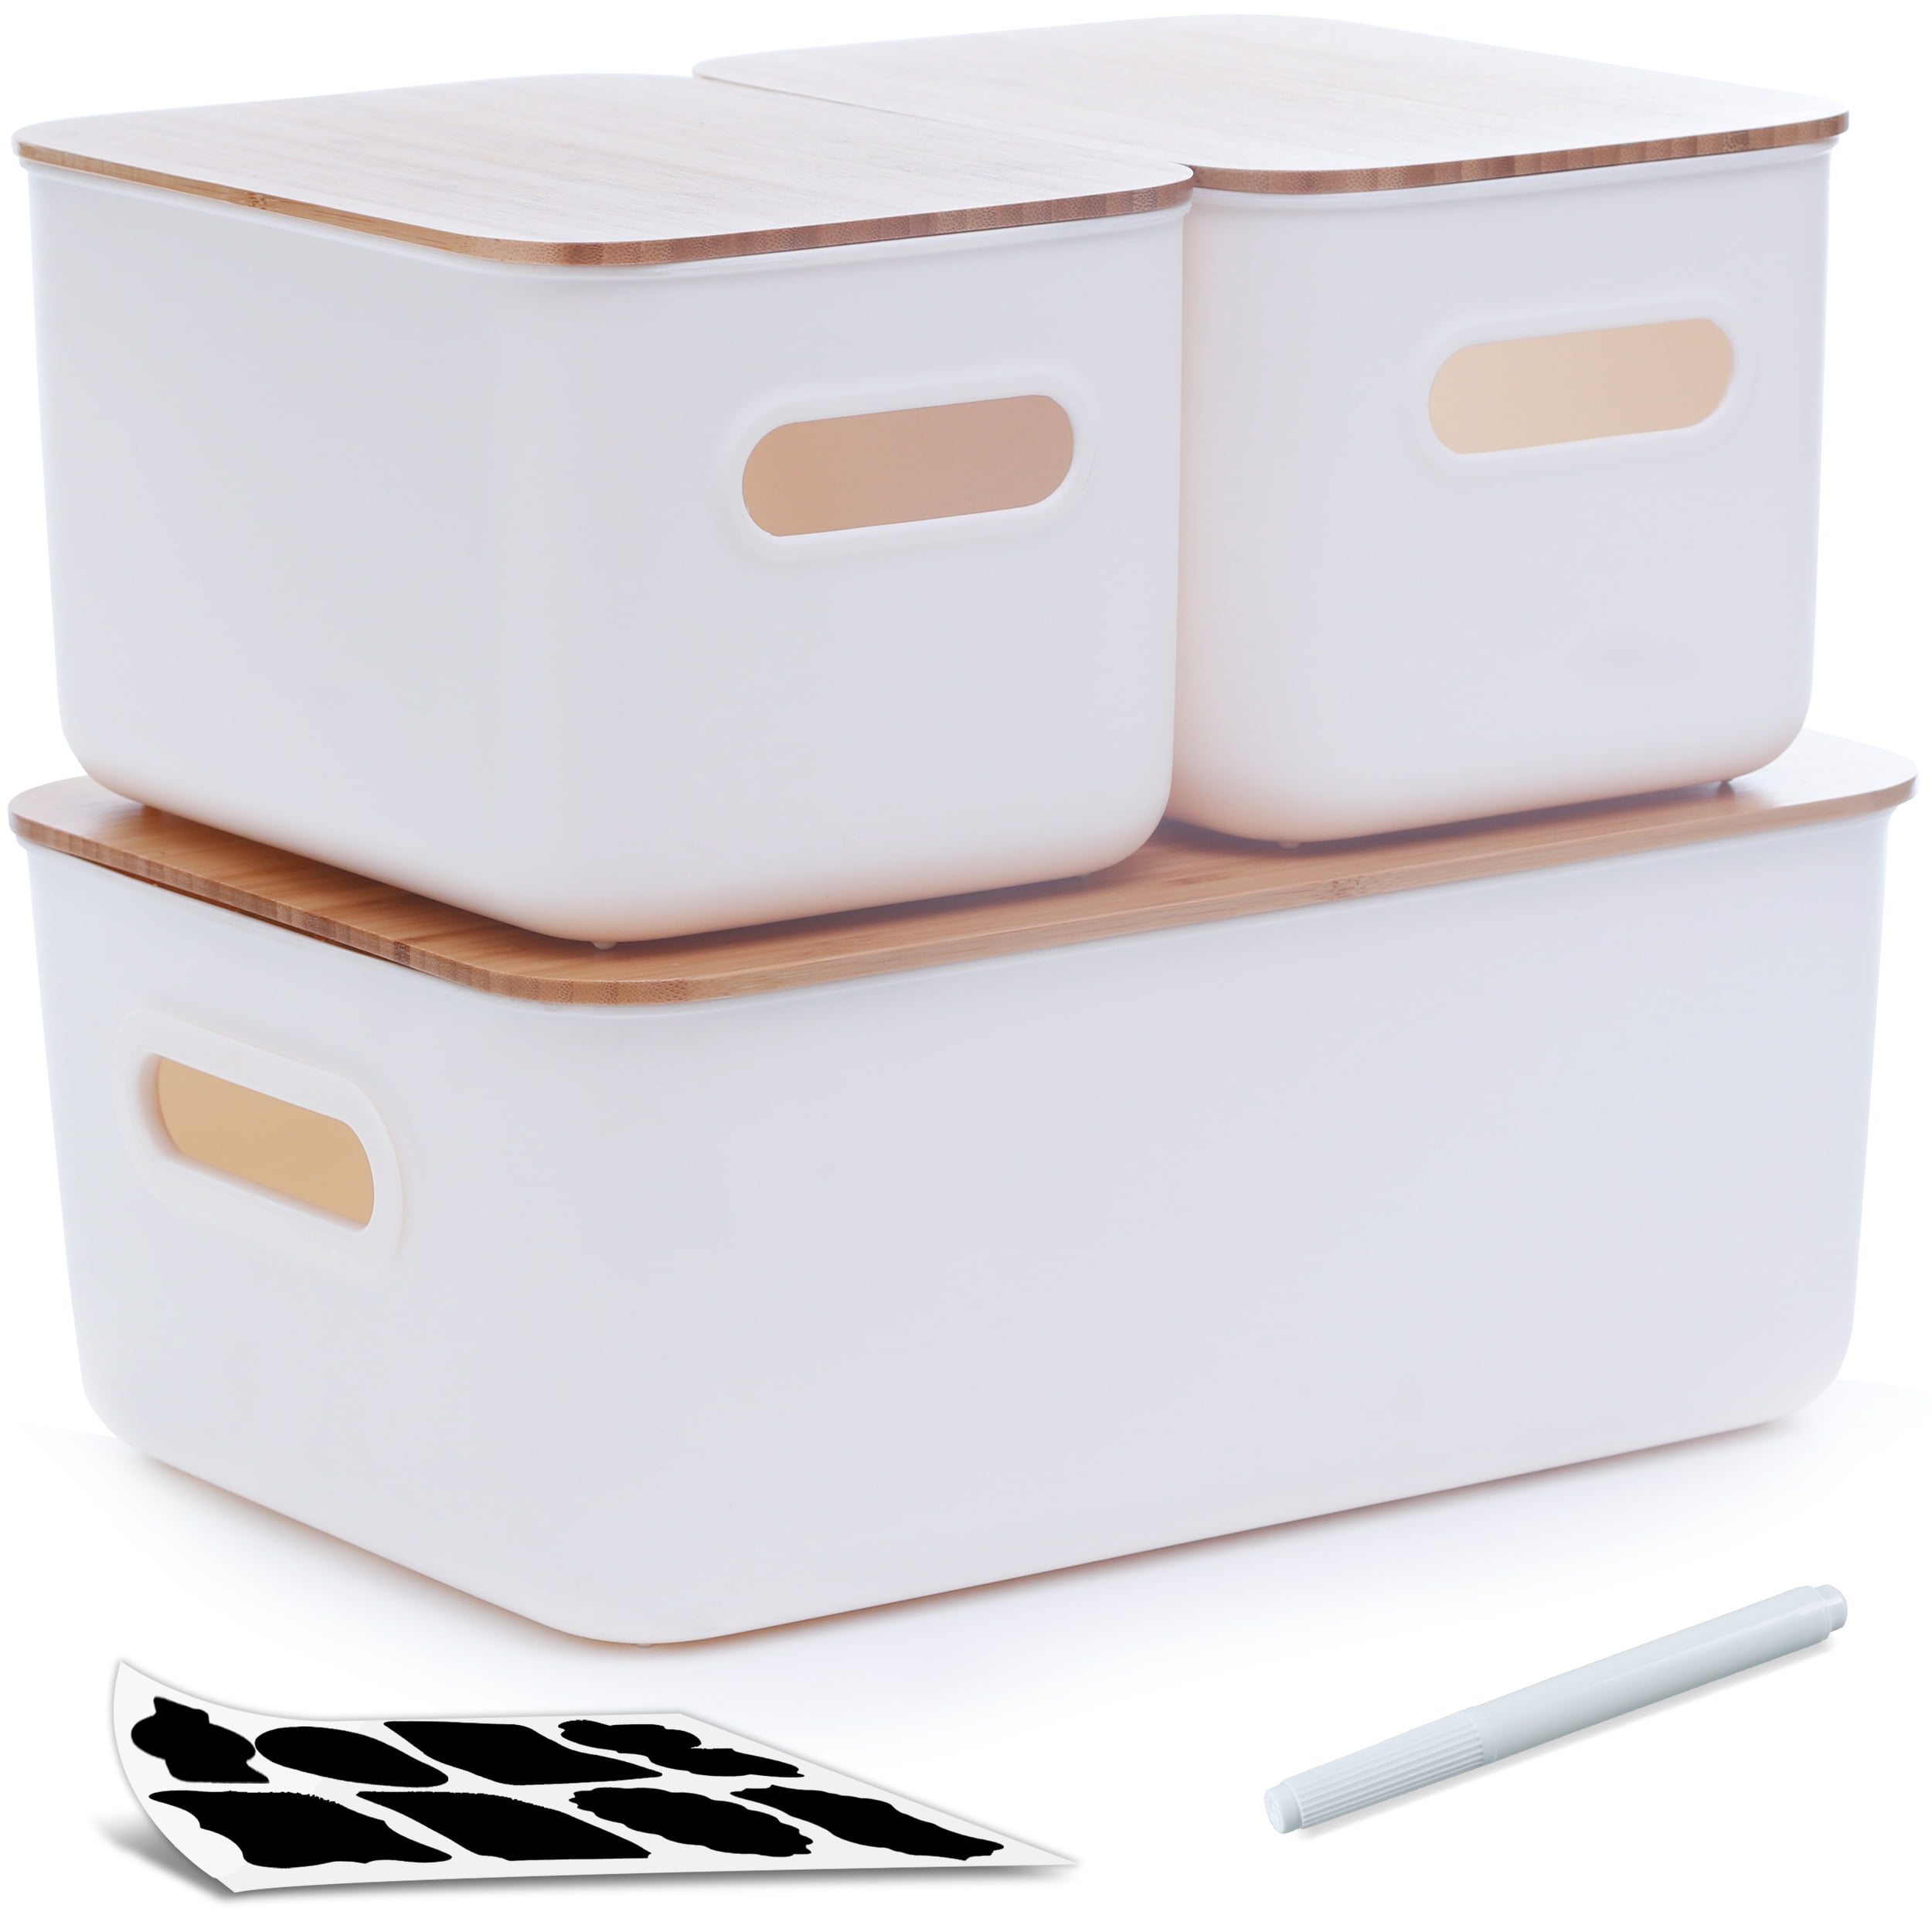 Small Stackable Storage Bins Lids